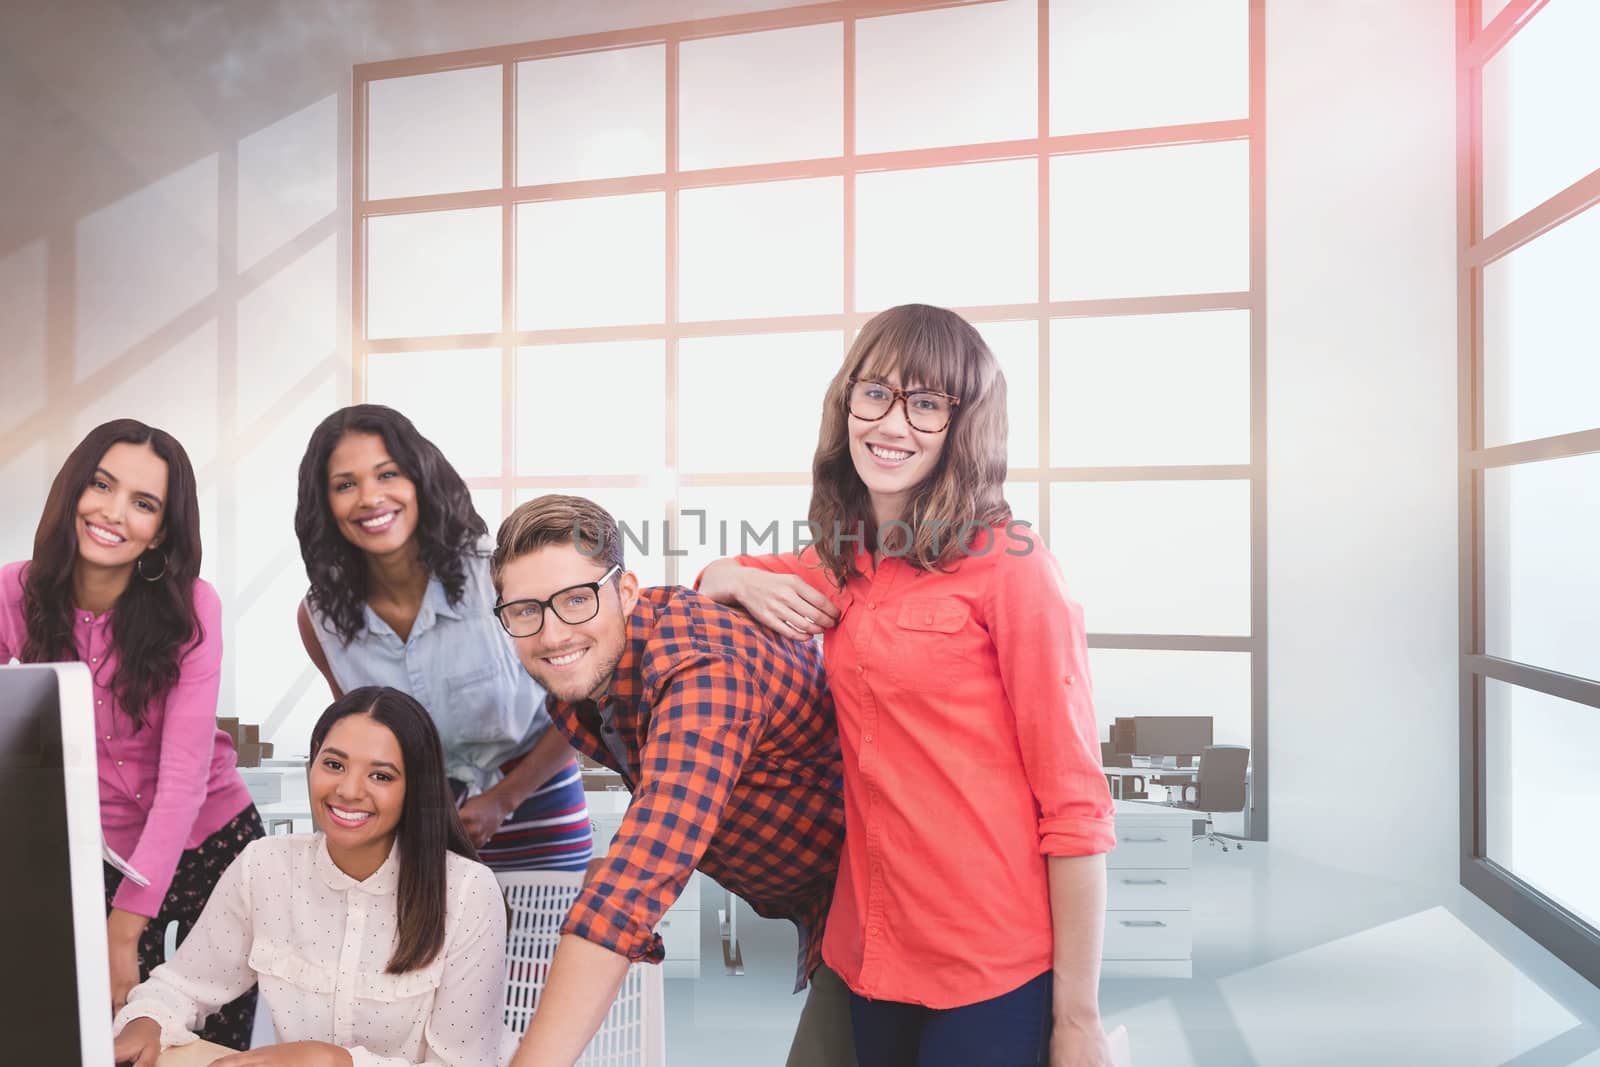 Digital composite of Happy business people at a desk using a computer